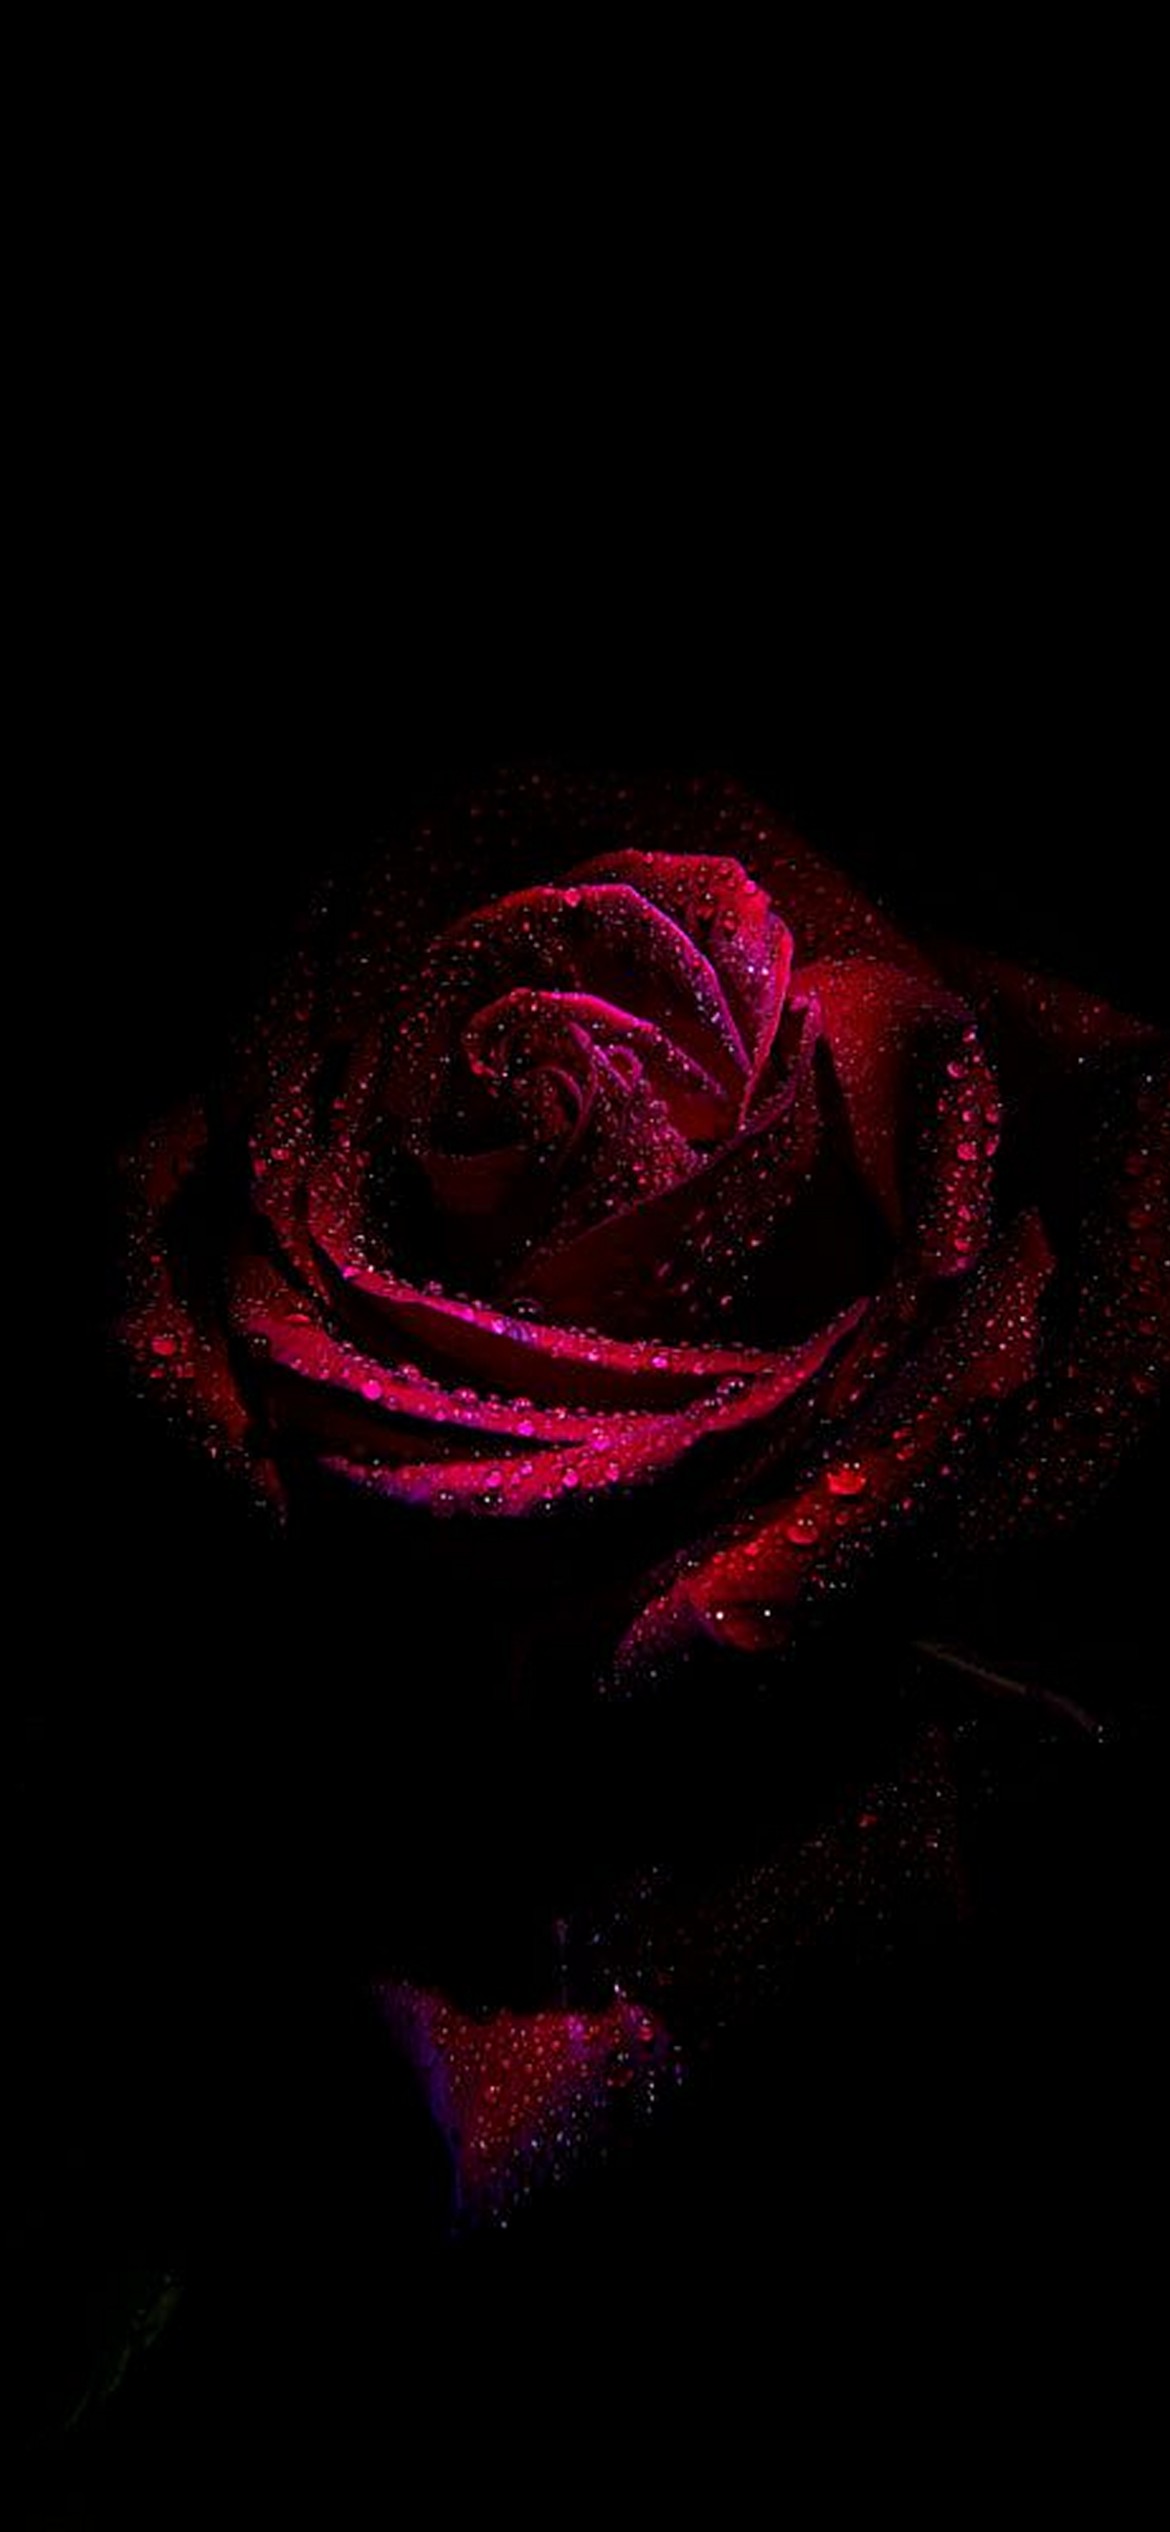 Fire Roses wallpaper by Graphistun1919  Download on ZEDGE  00b3